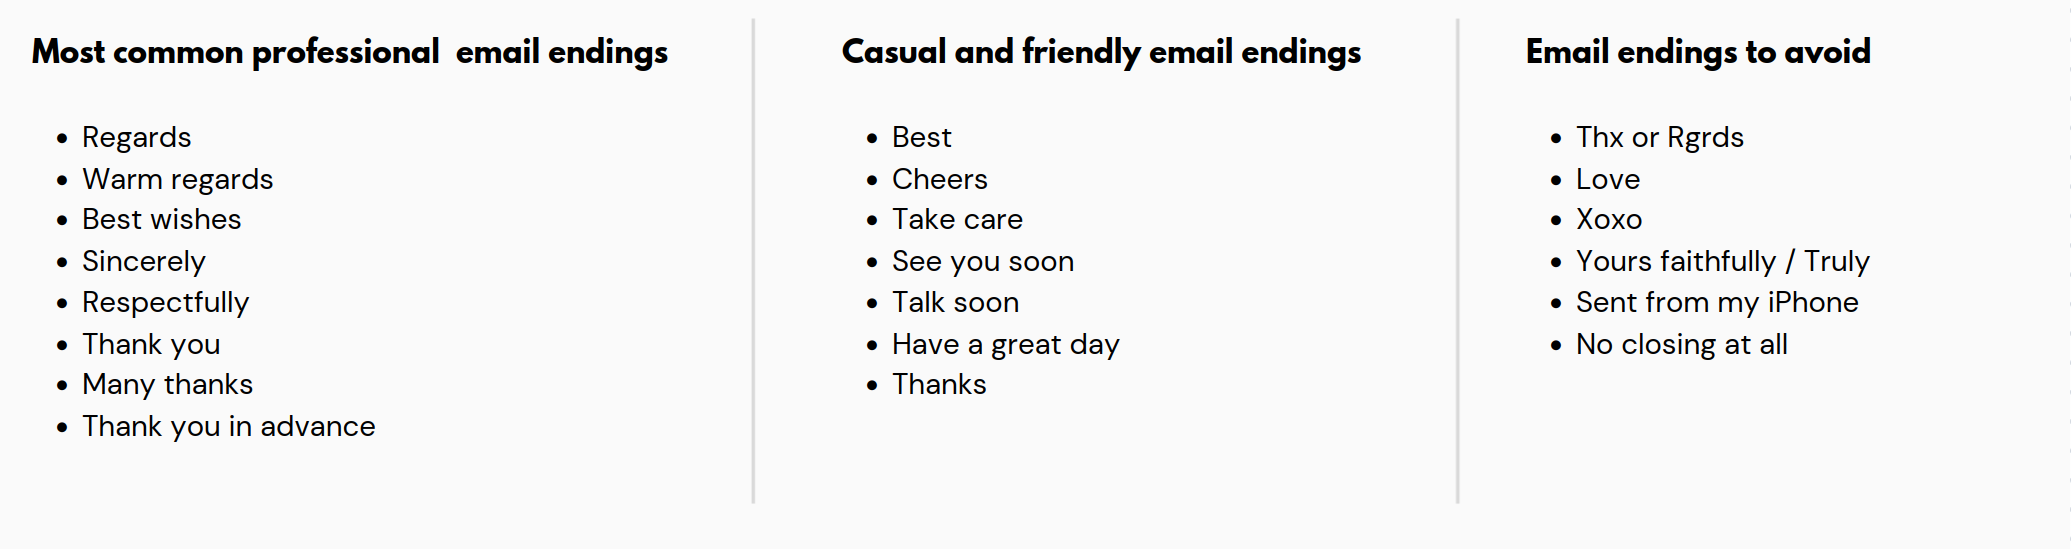 Examples of how to end an email professionally and friendly with Dos and Don'ts